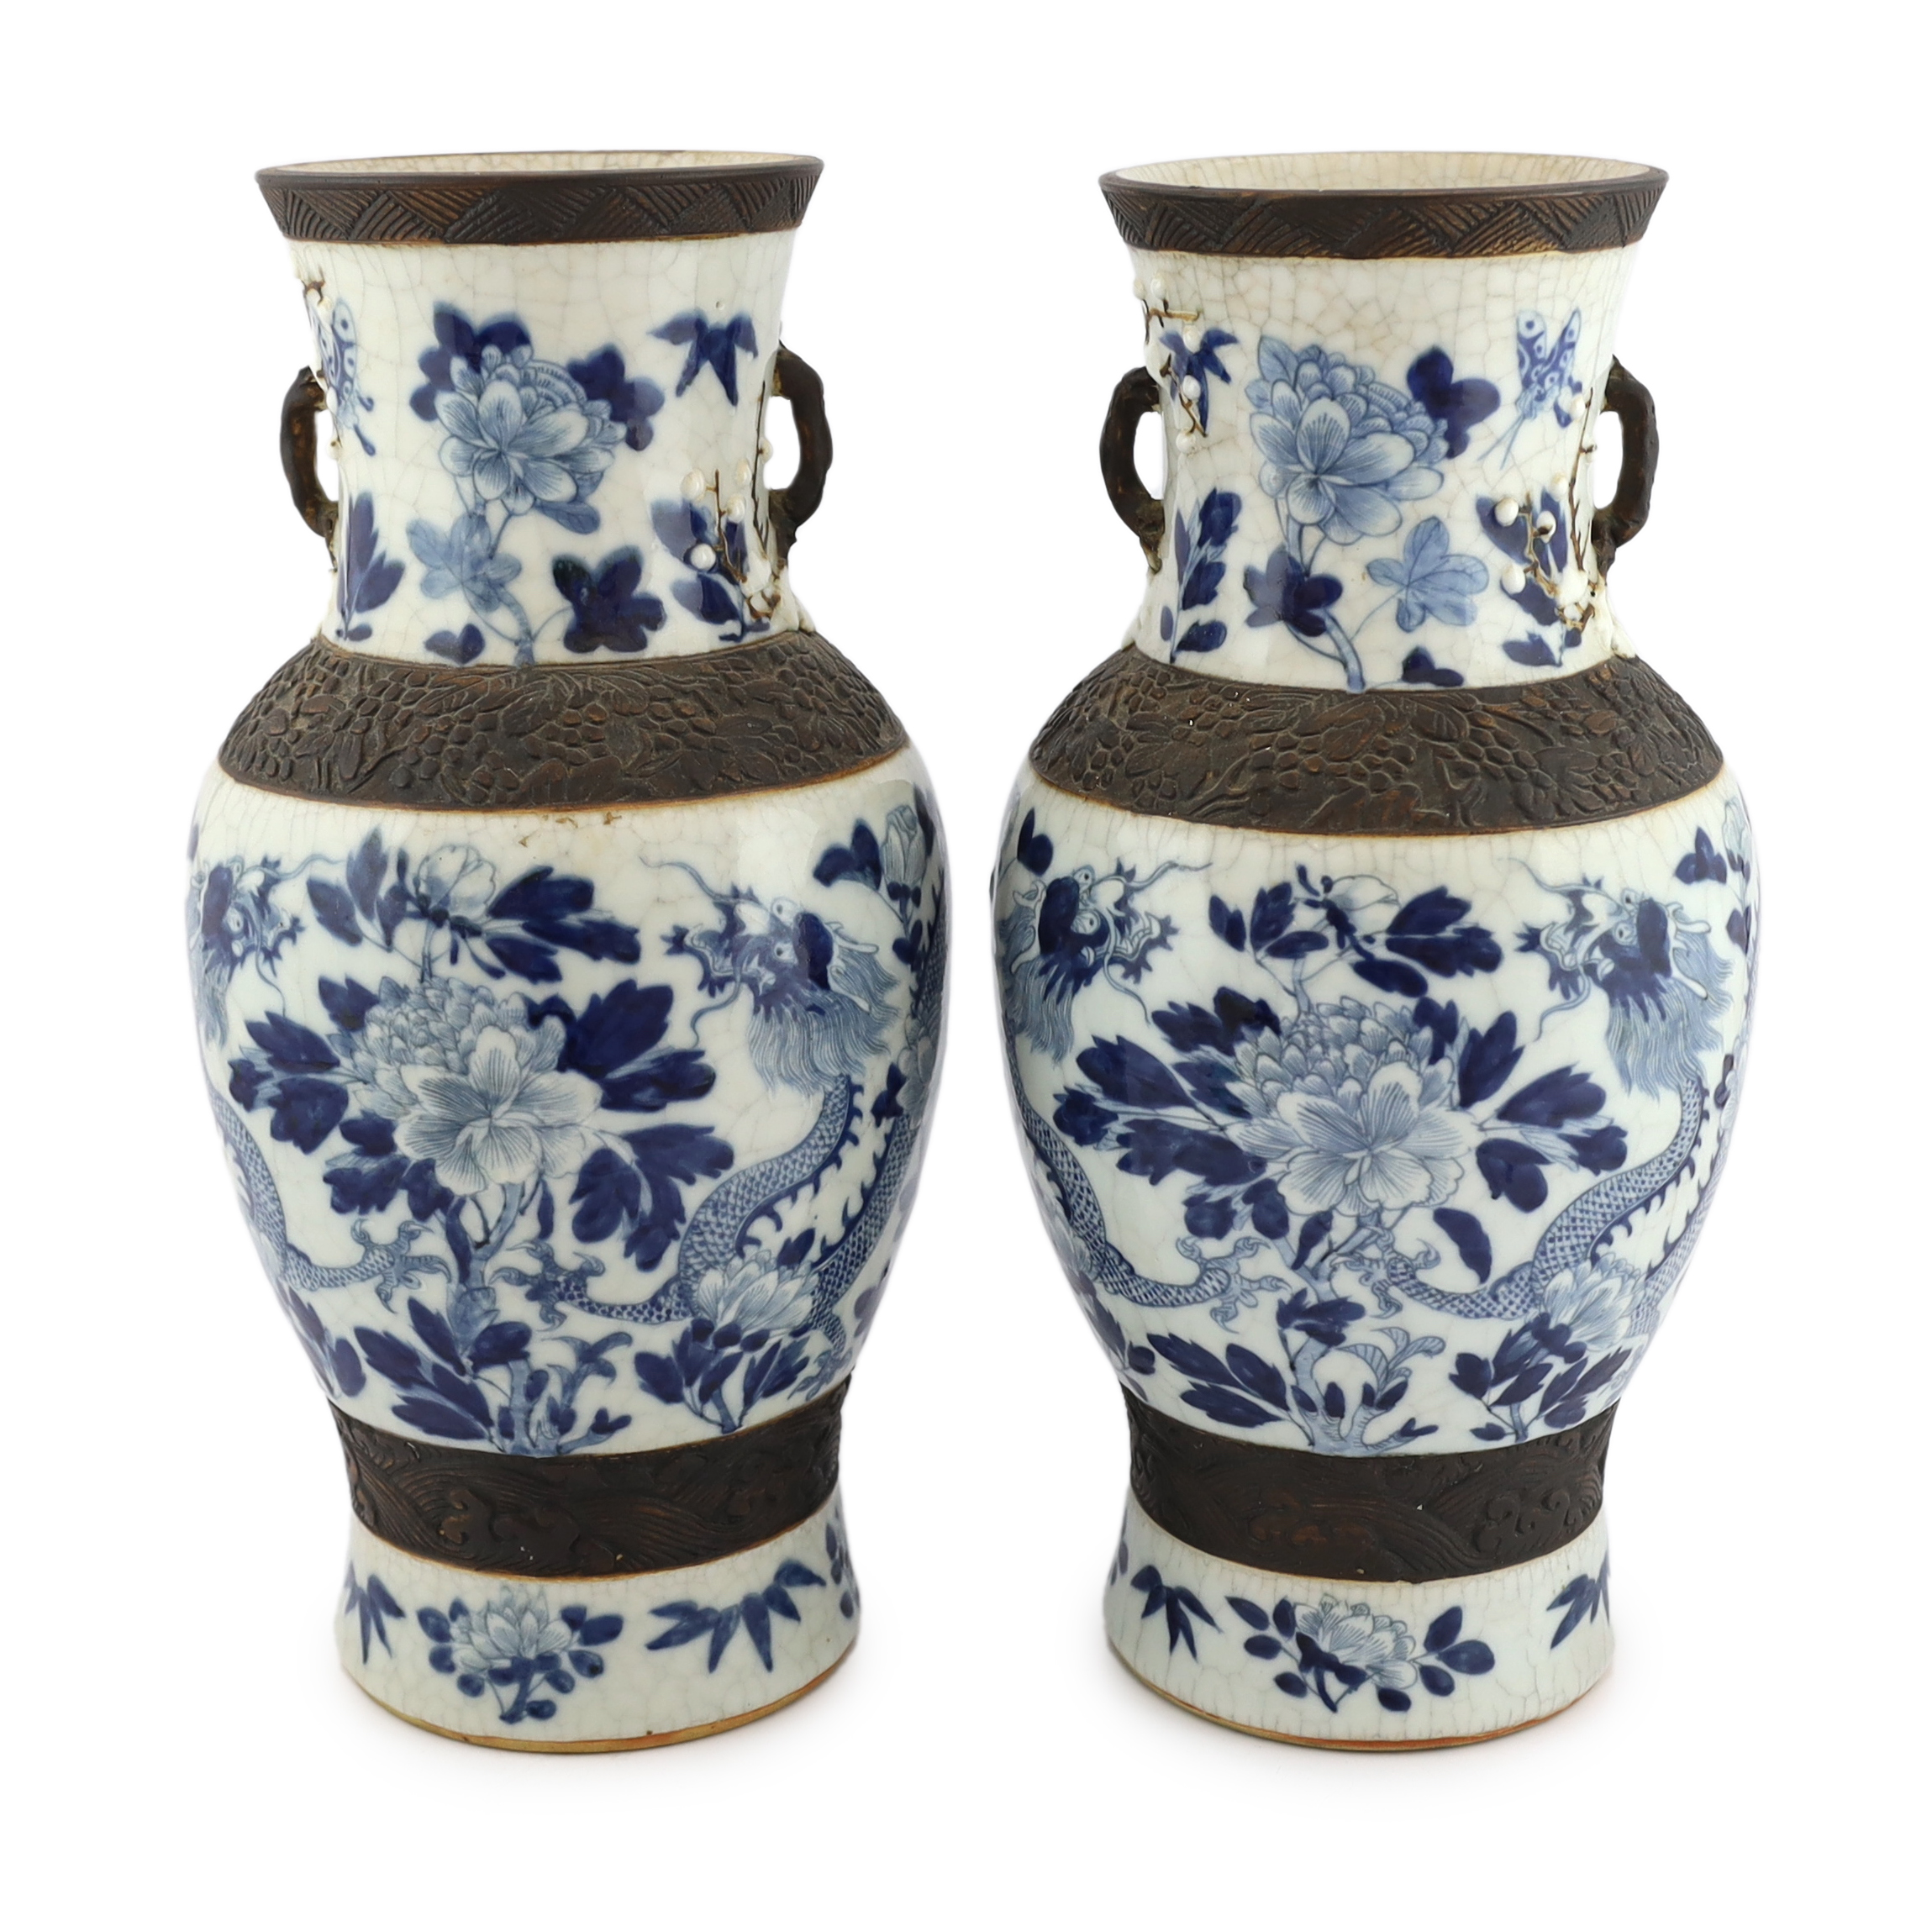 A pair of large Chinese blue and white crackle-glaze ‘dragon’ vases, early 20th century, each